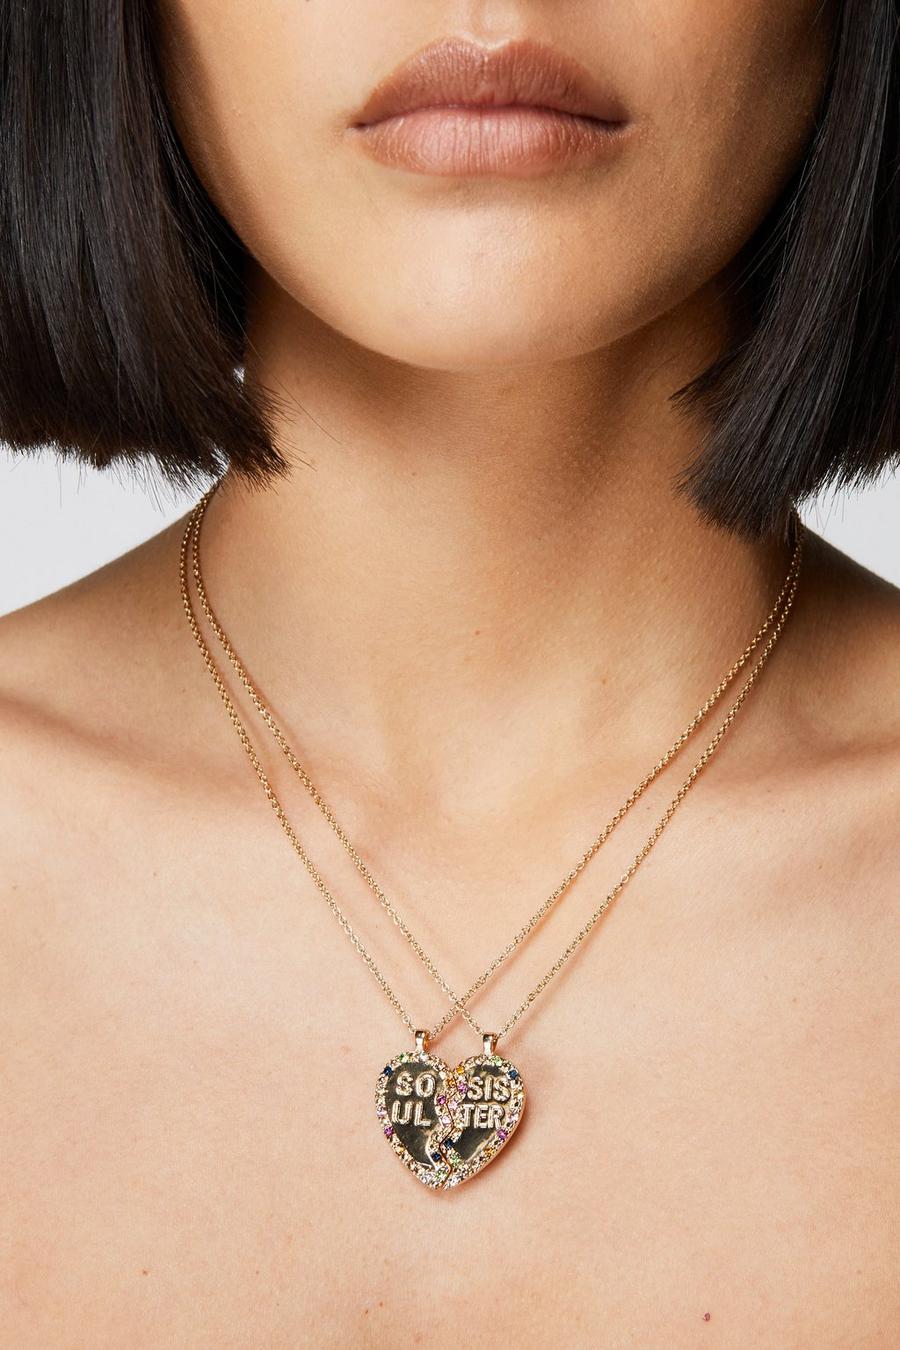 Gold metallic Embellished Heart Friendship Charm Necklace